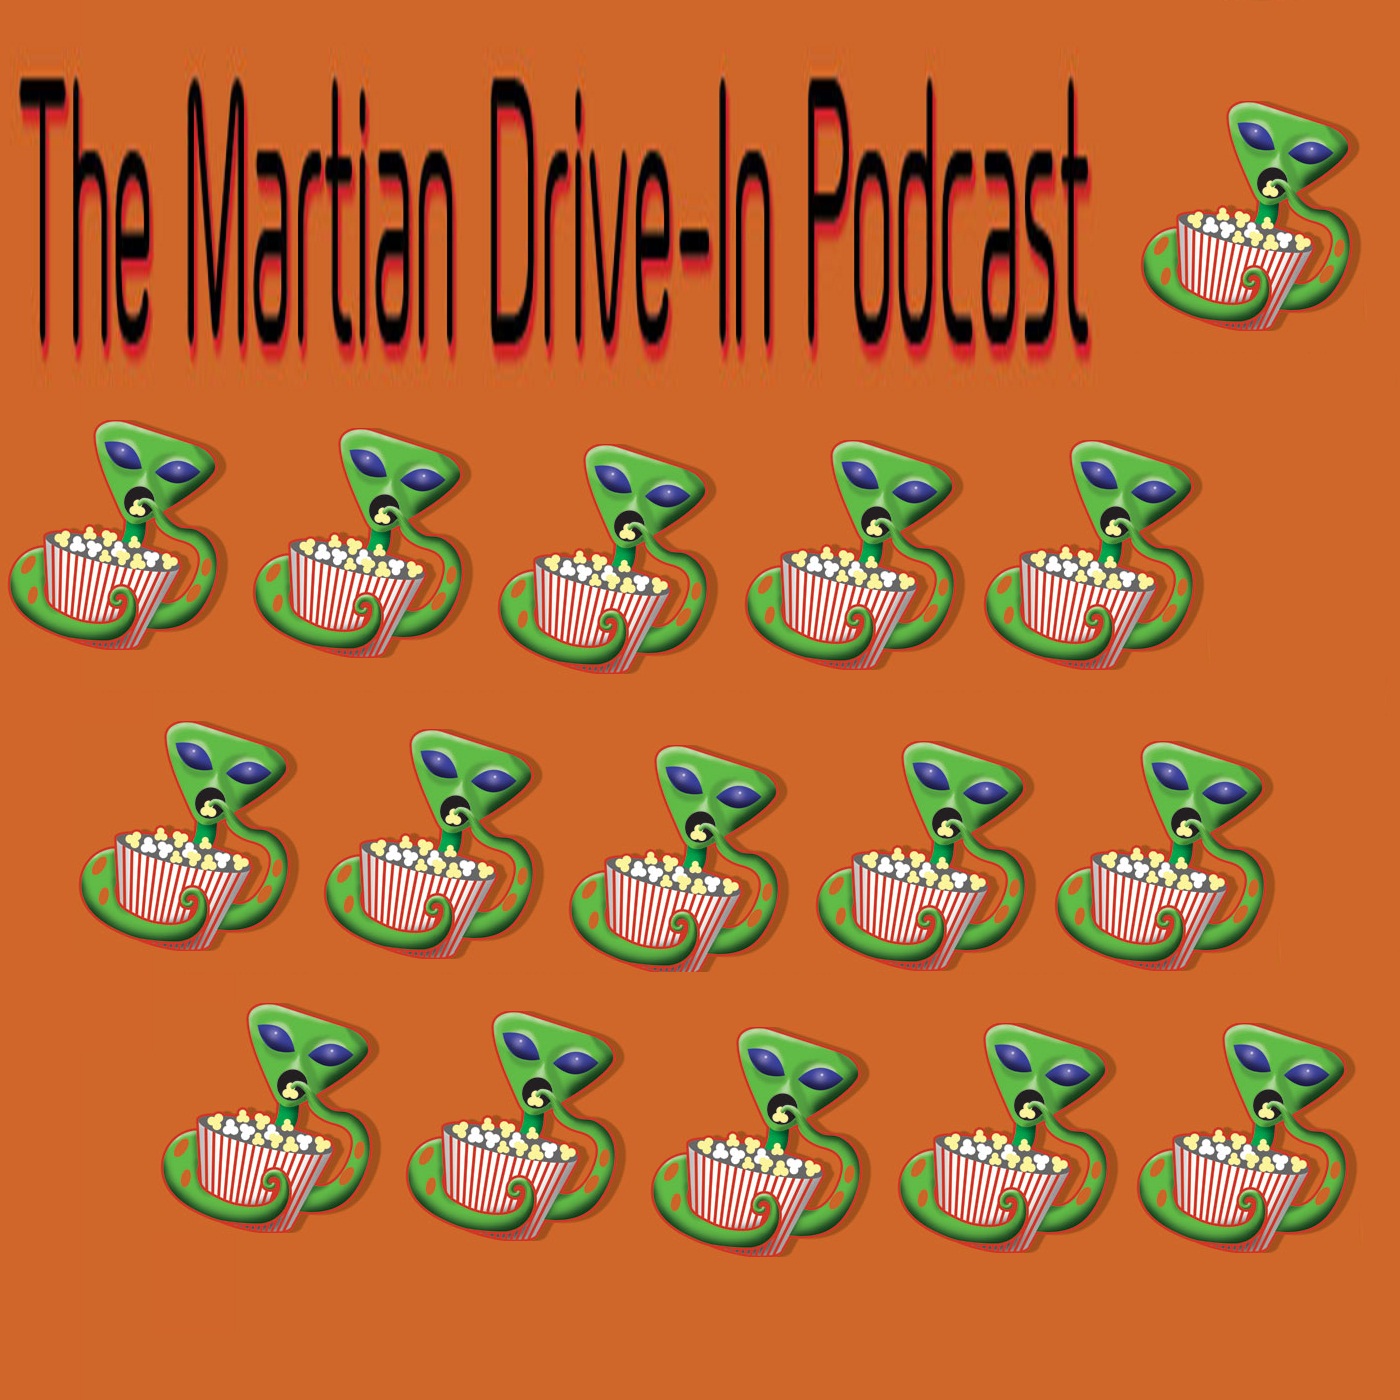 Martian Drive-In Podcast 63 - The Best Of Christopher Lee